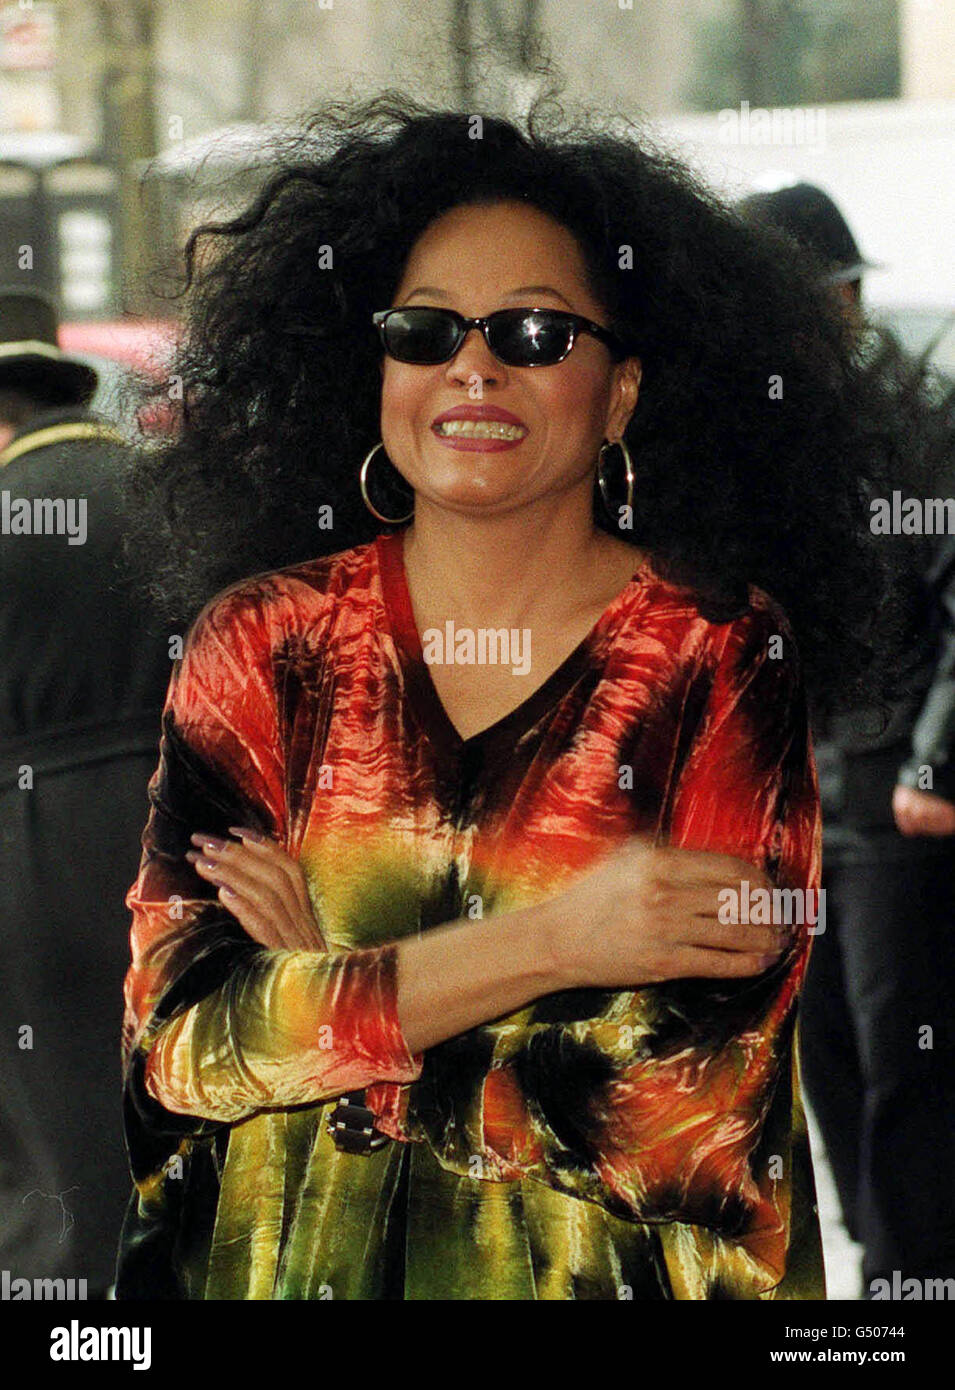 American singer Diana Ross arriving for The Pride of Britain Awards, at the Hilton Hotel in London. The awards pay tribute to those who have most inspired the nation over the past 12 months with their extraordinary courage, heroism or outstanding achievement. *29/06/2002 The Prince of Wales was being serenaded by pop diva Diana Ross at a star-studded charity concert. Rod Stewart, Dame Shirley Bassey, Ronan Keating and Gabrielle are the other stars on the bill at the Picnic in the Park event in London's Hyde Park in aid of the Prince's Trust. Ross has promised to dedicate one of her songs to Stock Photo